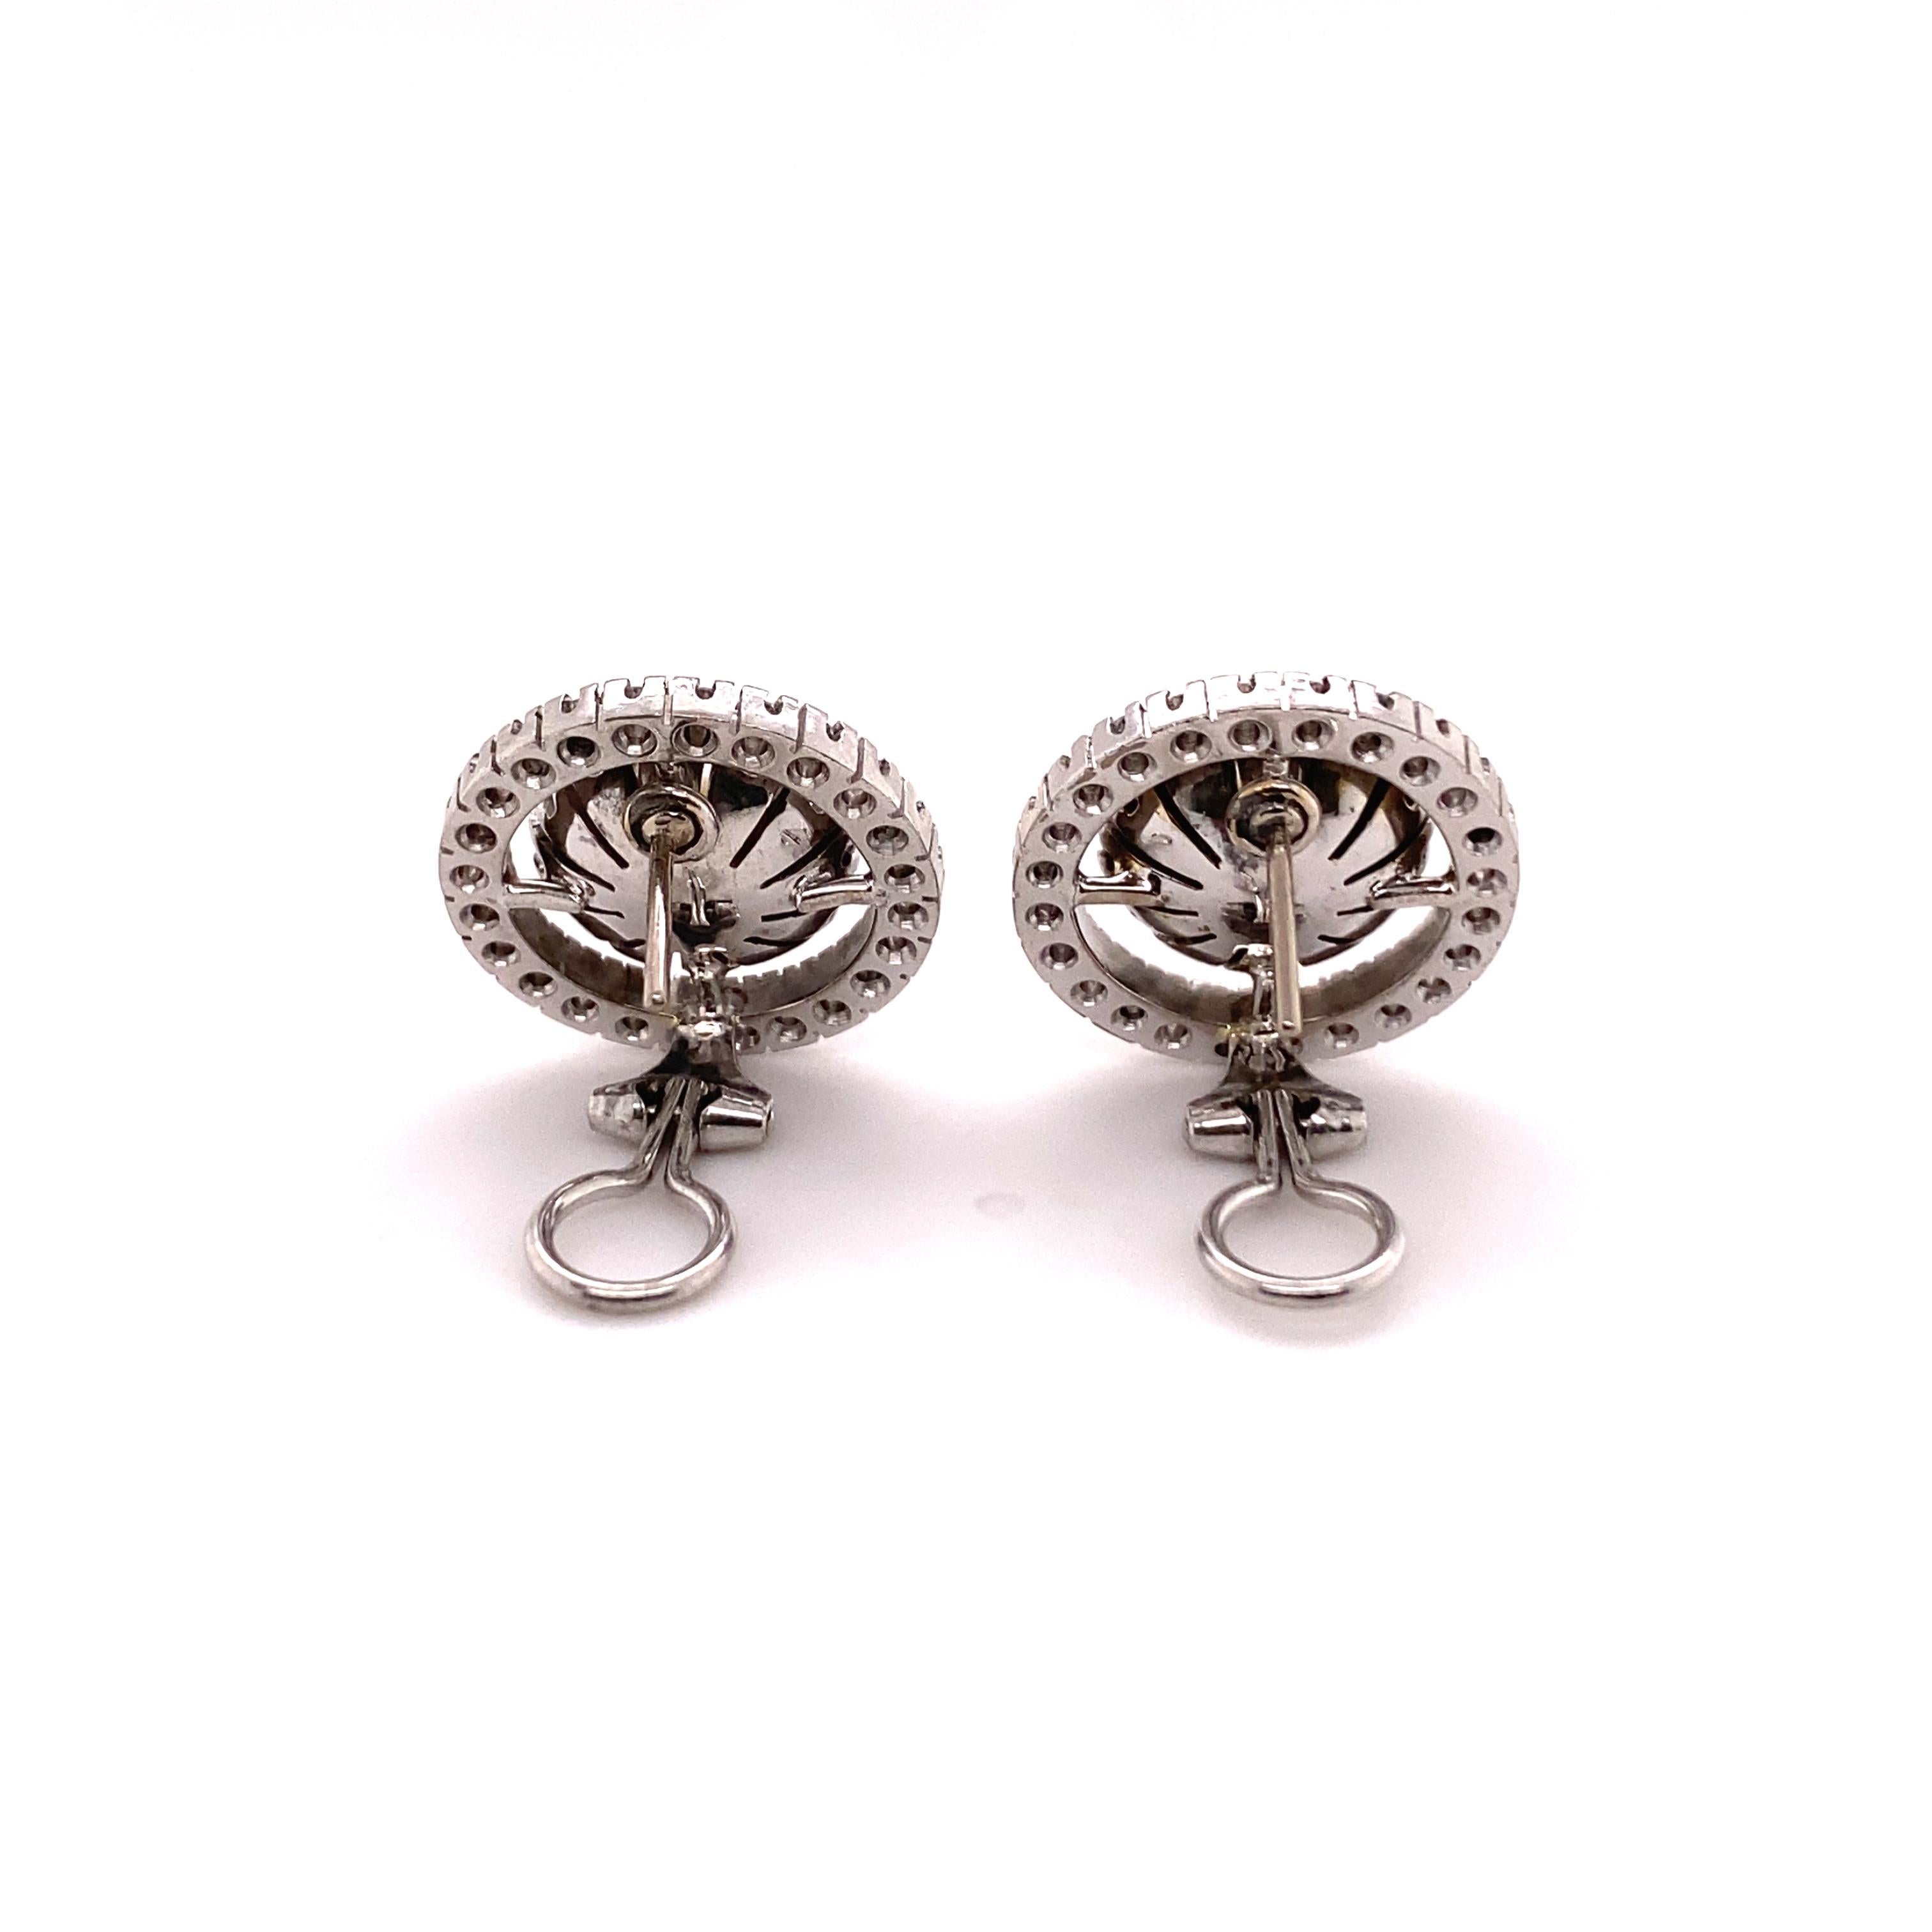 Akoya Cultured Pearl and Diamond Earclips in 18 Karat White Gold 2